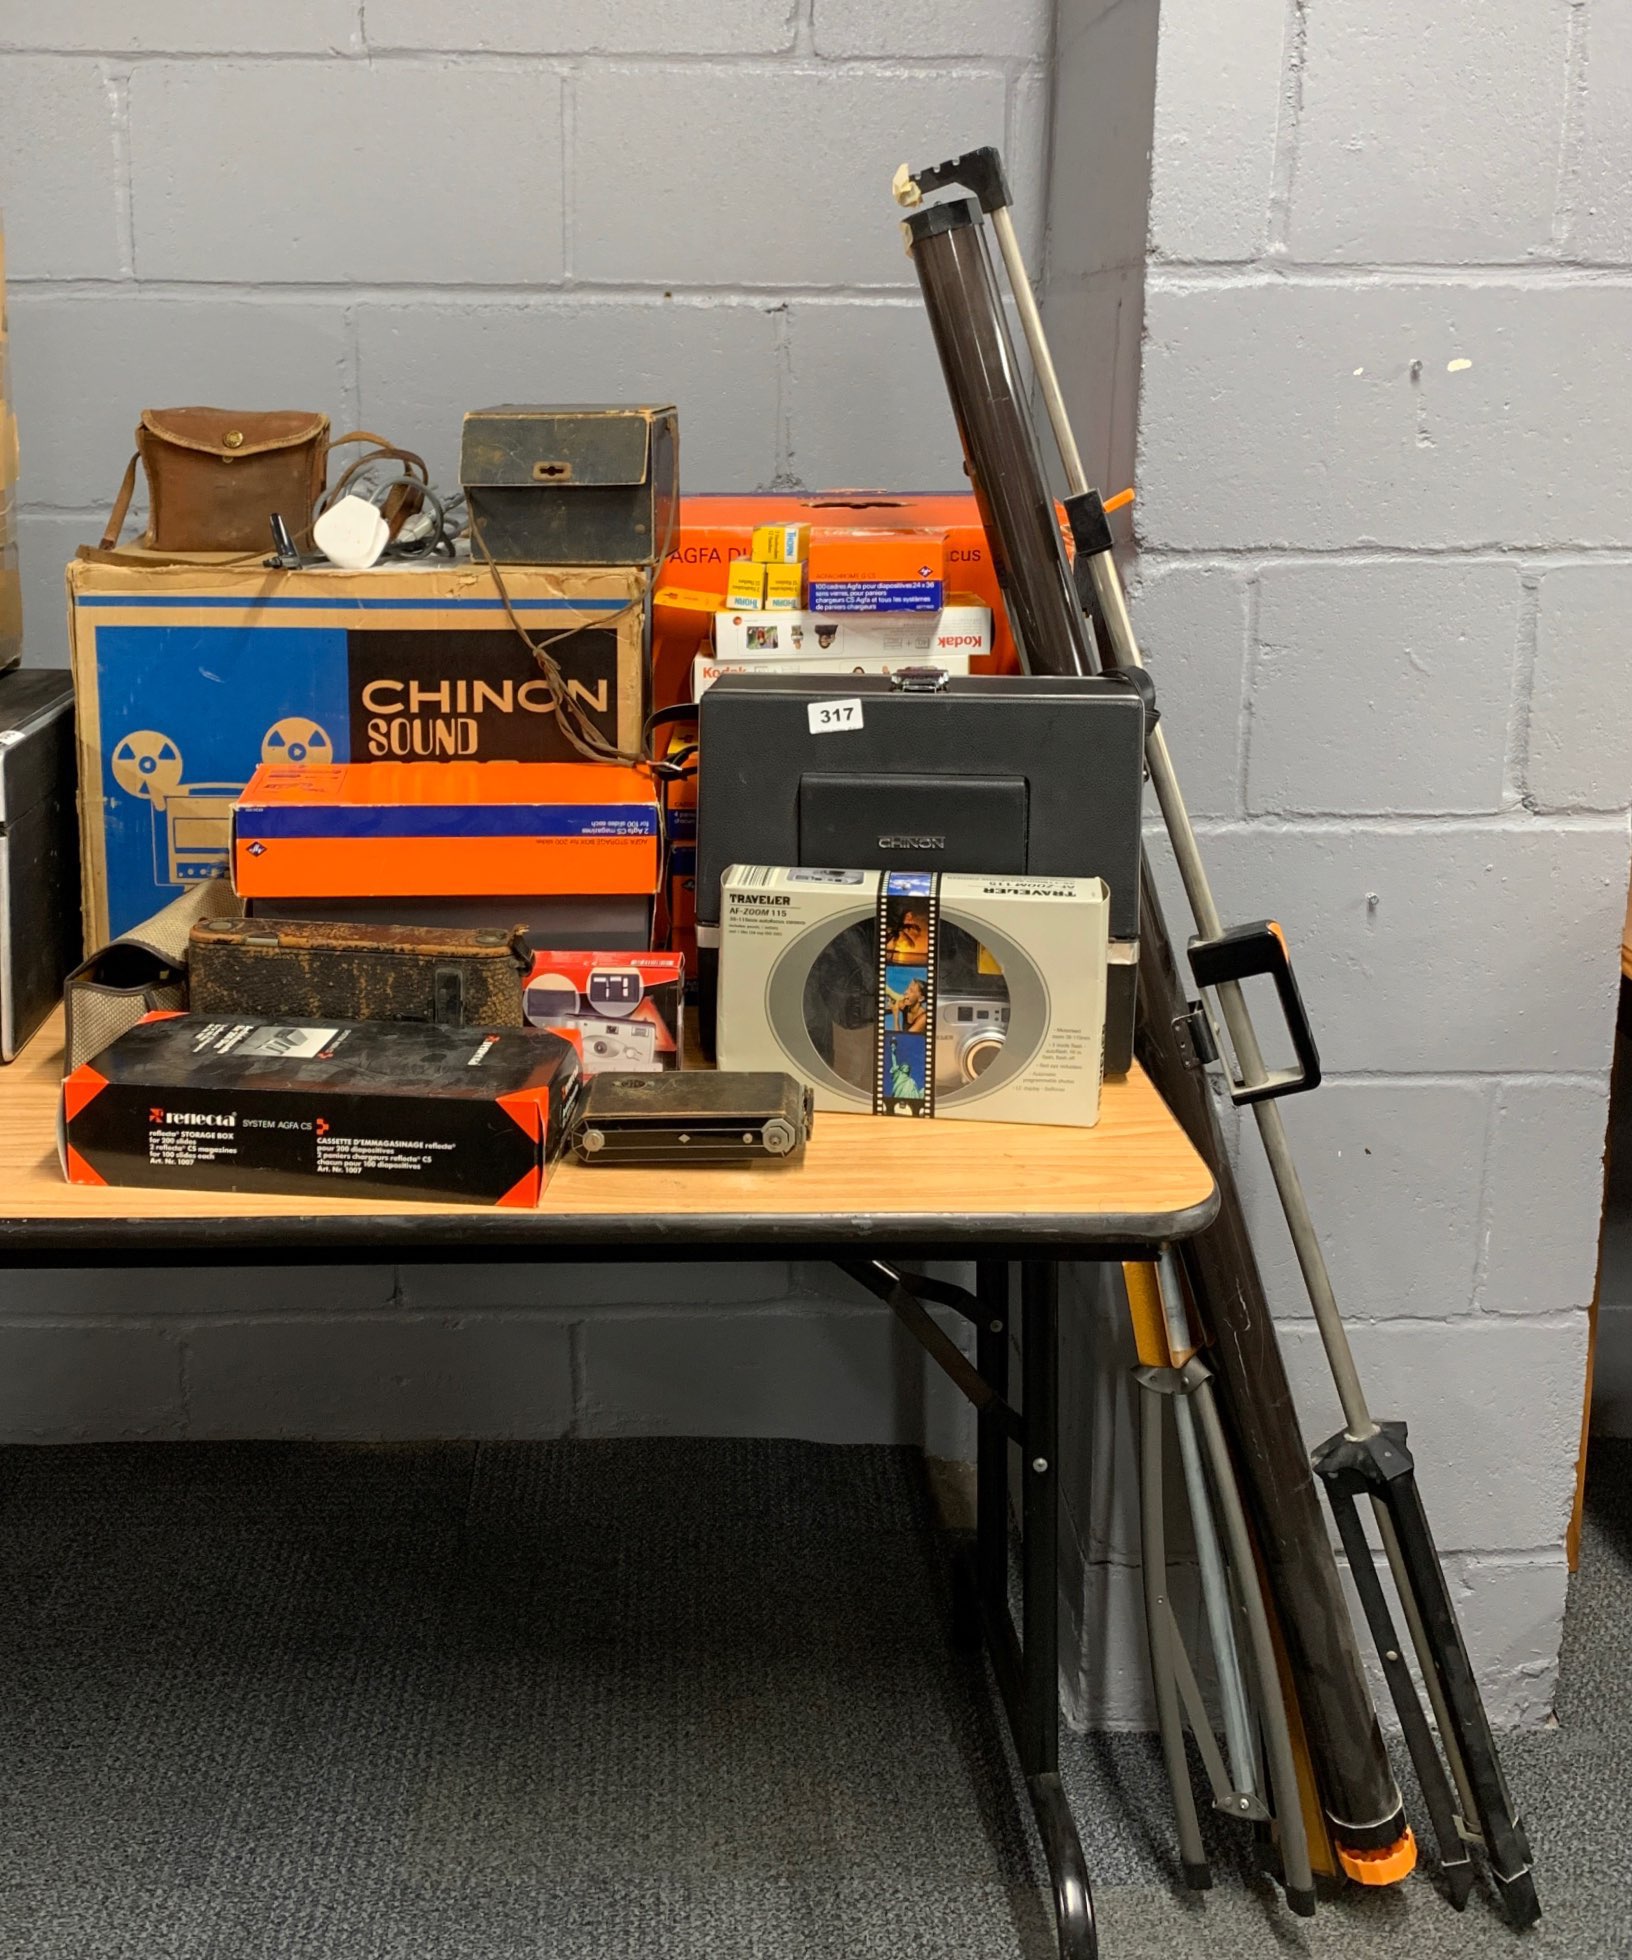 A quantity of mixed still and cinephotographic equipment, including Chinon movie camera and